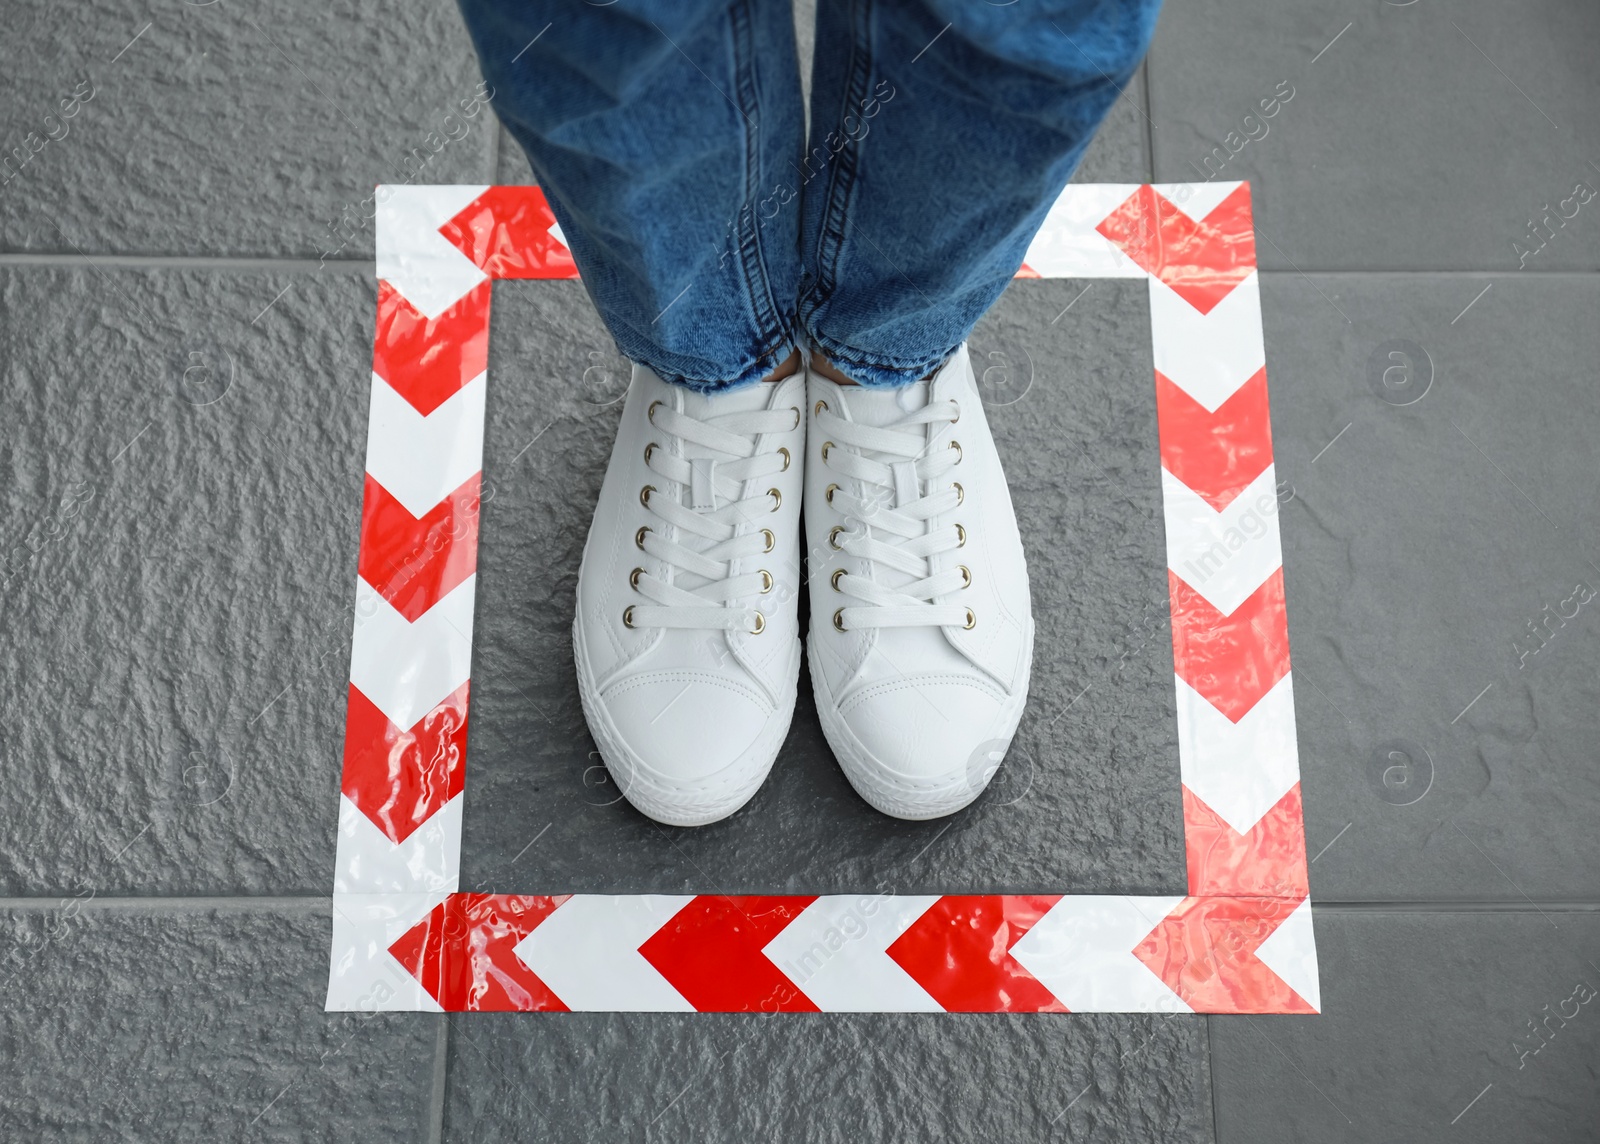 Photo of Woman standing on taped floor marking for social distance, top view. Coronavirus pandemic